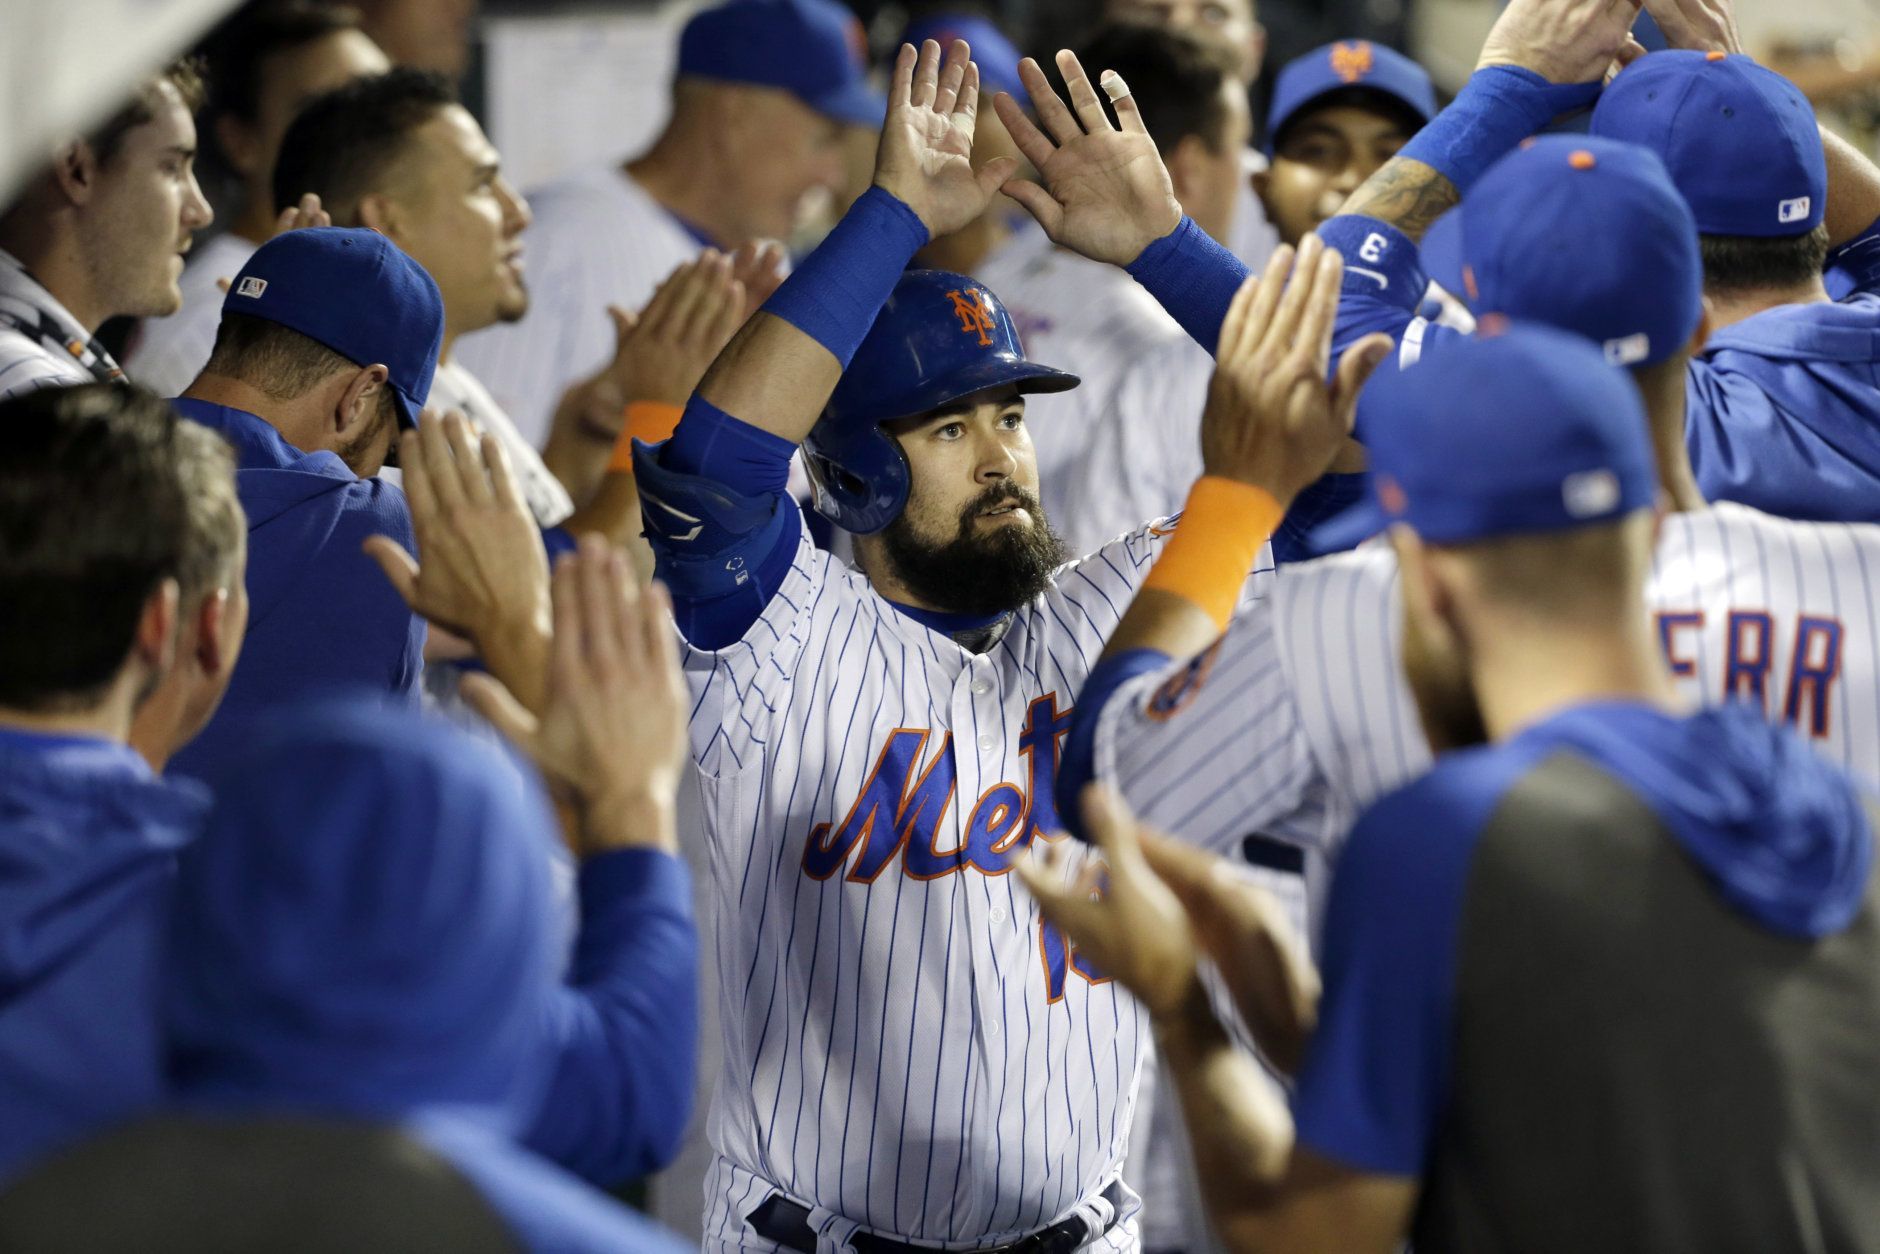 New York Mets' Luis Guillorme is greeted by teammates after hitting a home run during the eighth inning of a baseball game against the Washington Nationals, Saturday, Aug. 10, 2019, in New York. (AP Photo/Seth Wenig)